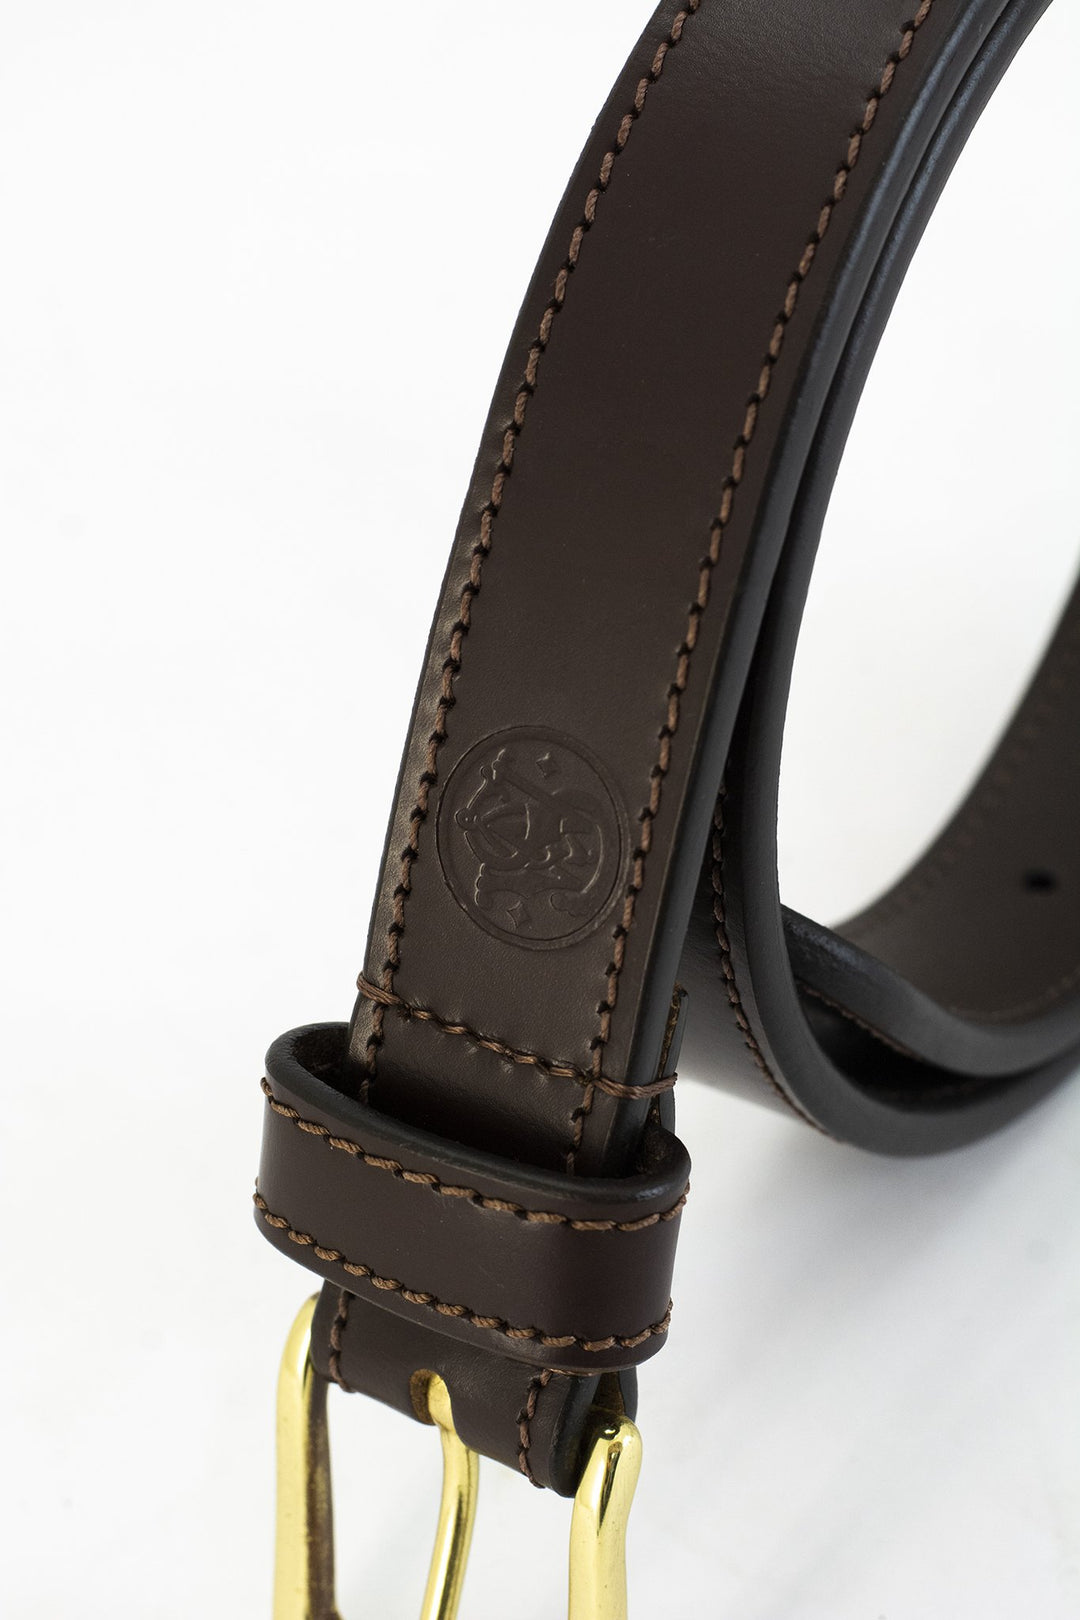 Smith & Wesson EDC Belts